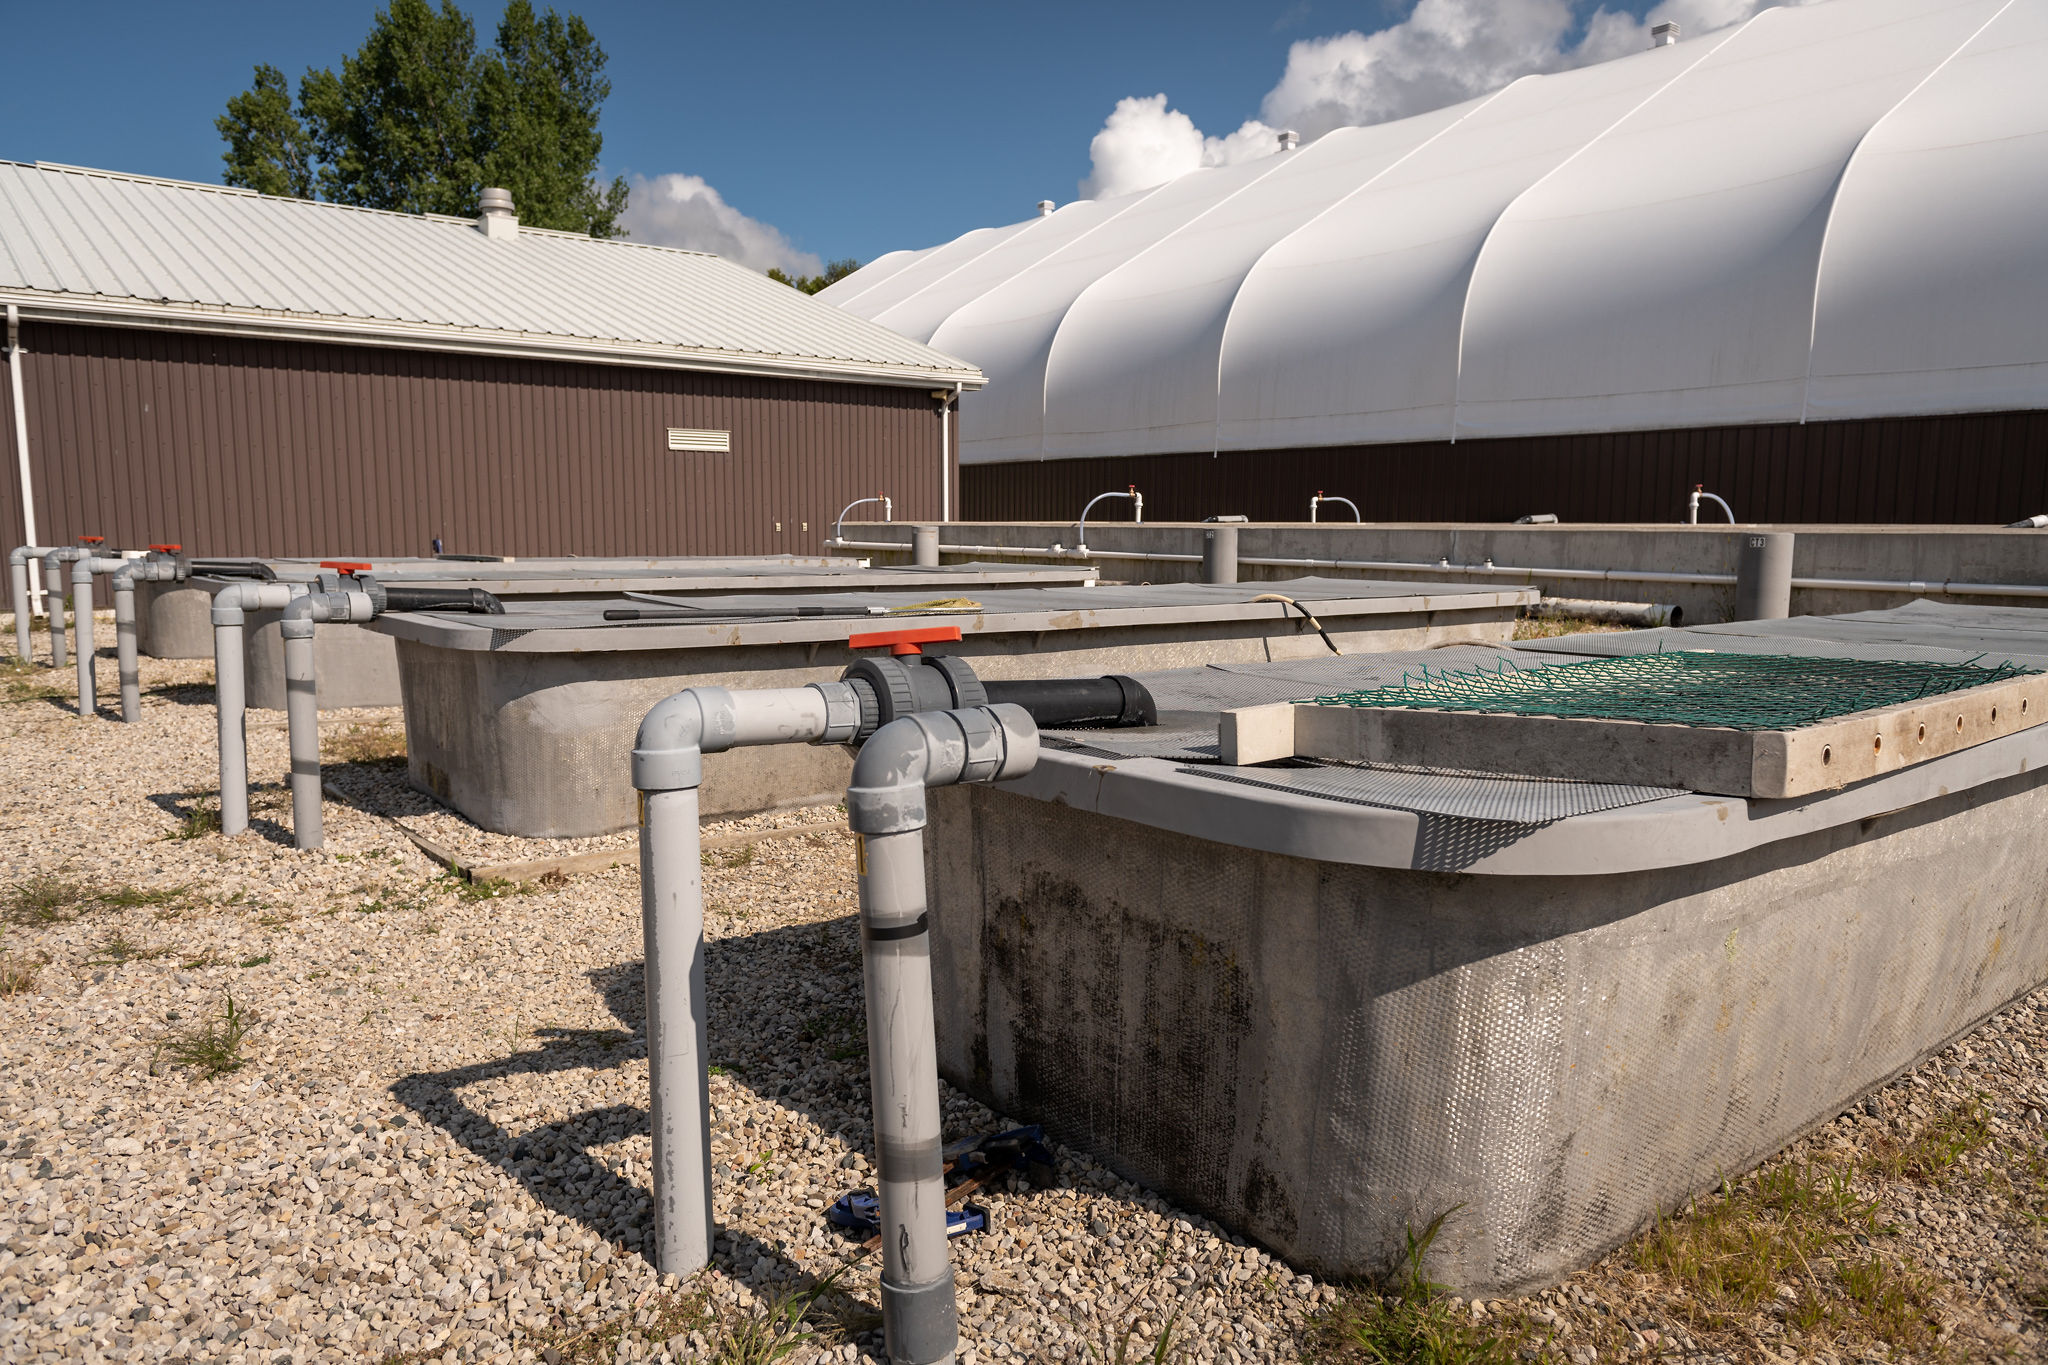 Large outdoor tanks made from fiberglass and poured concrete used for breeding